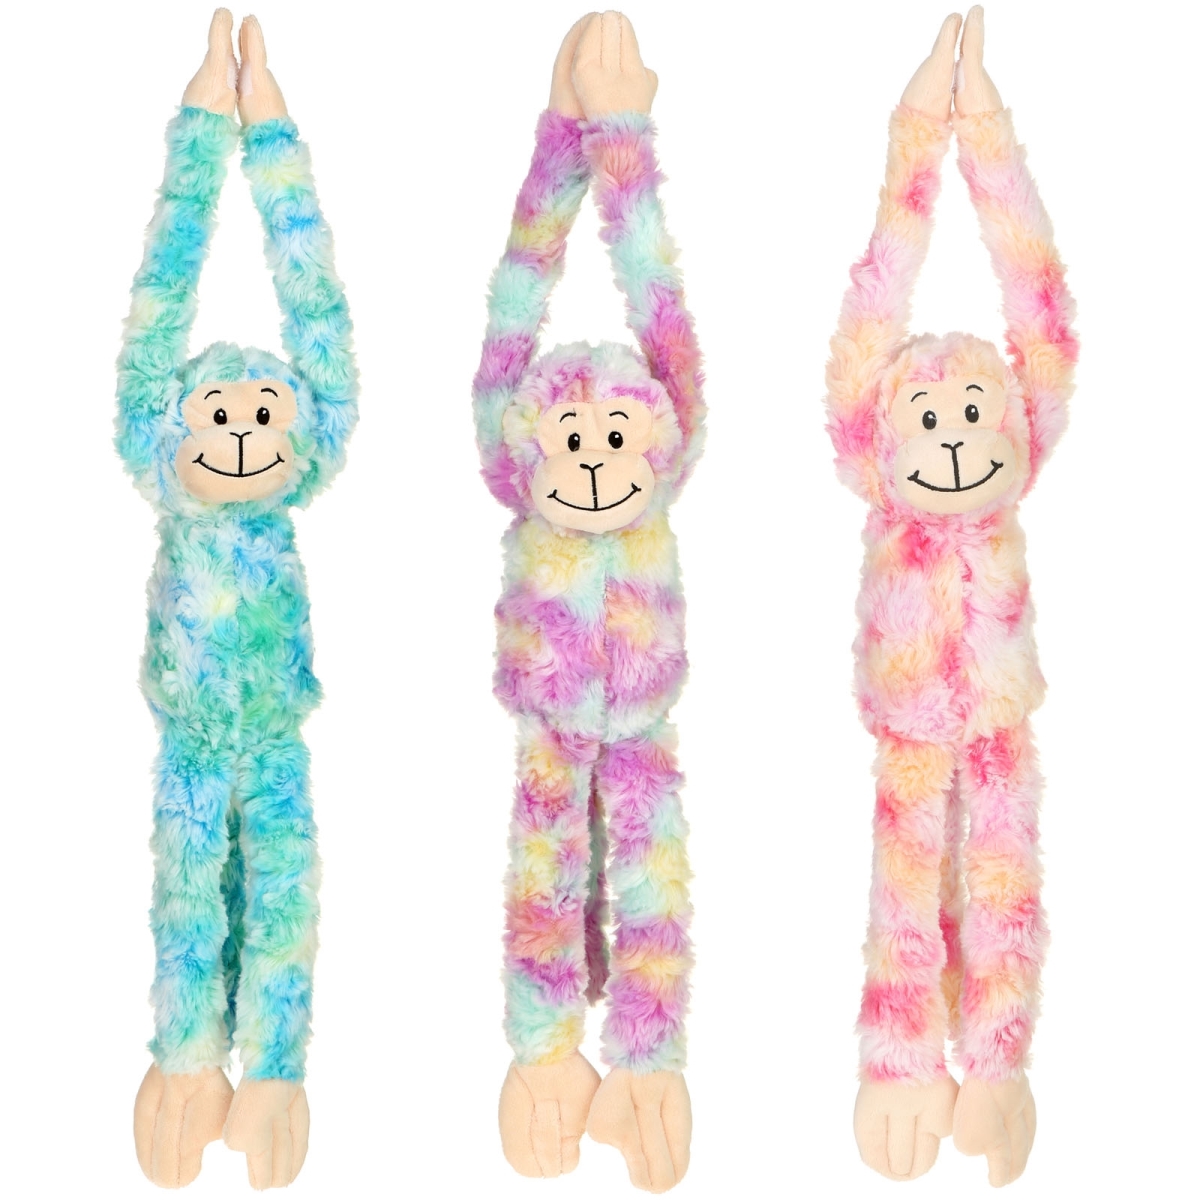 Picture of Giftable World A08071 18 in. Plush Long Arms Monkey - 3 Assorted Color